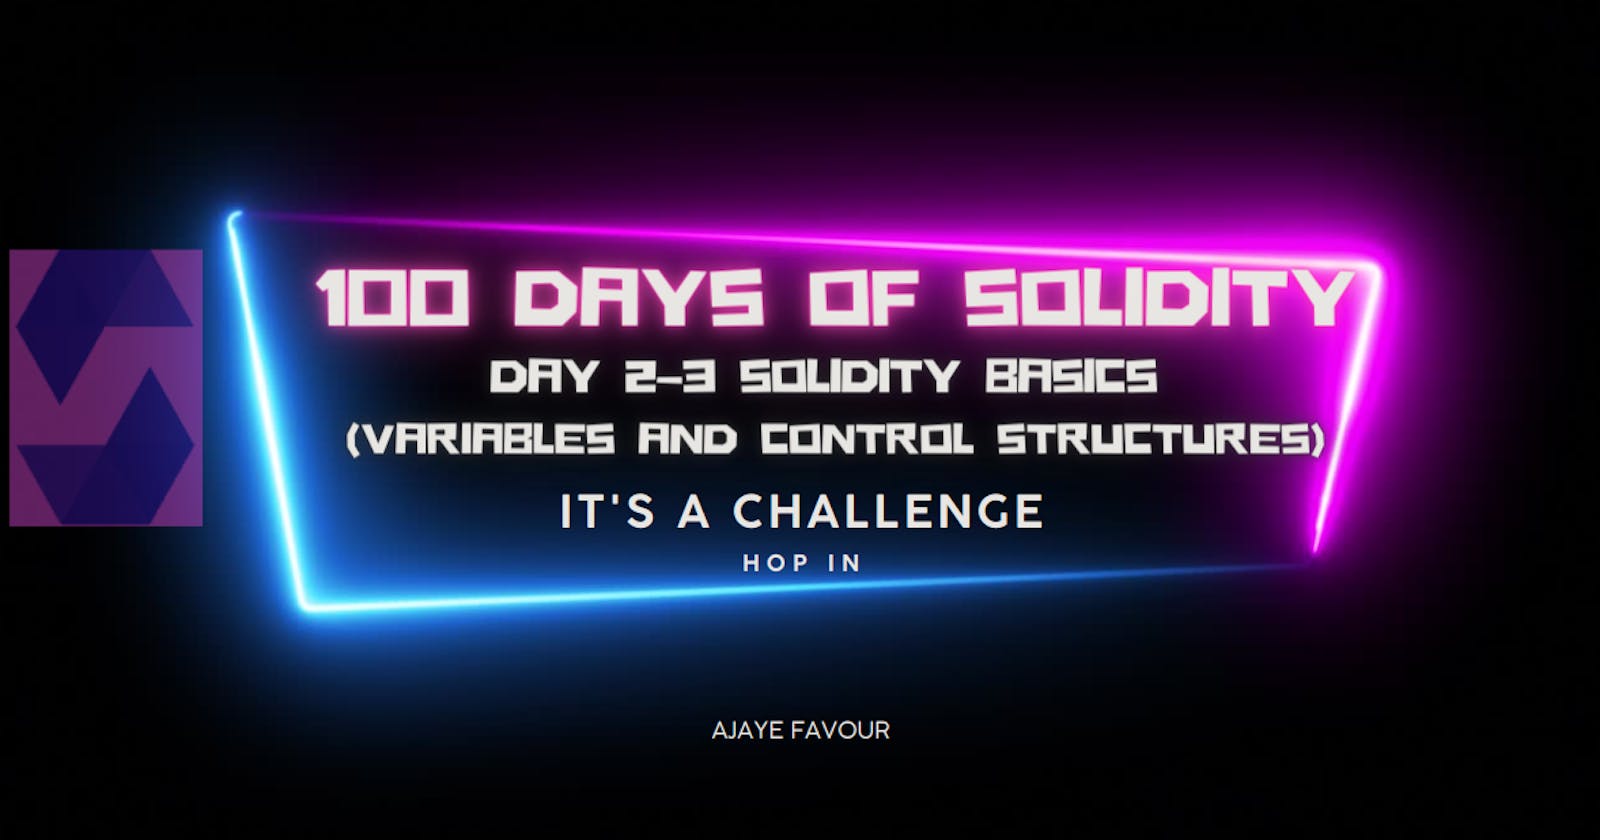 Variables and control structures in solidity (100 Days of Solidity (Day 2–3) pt. 2)